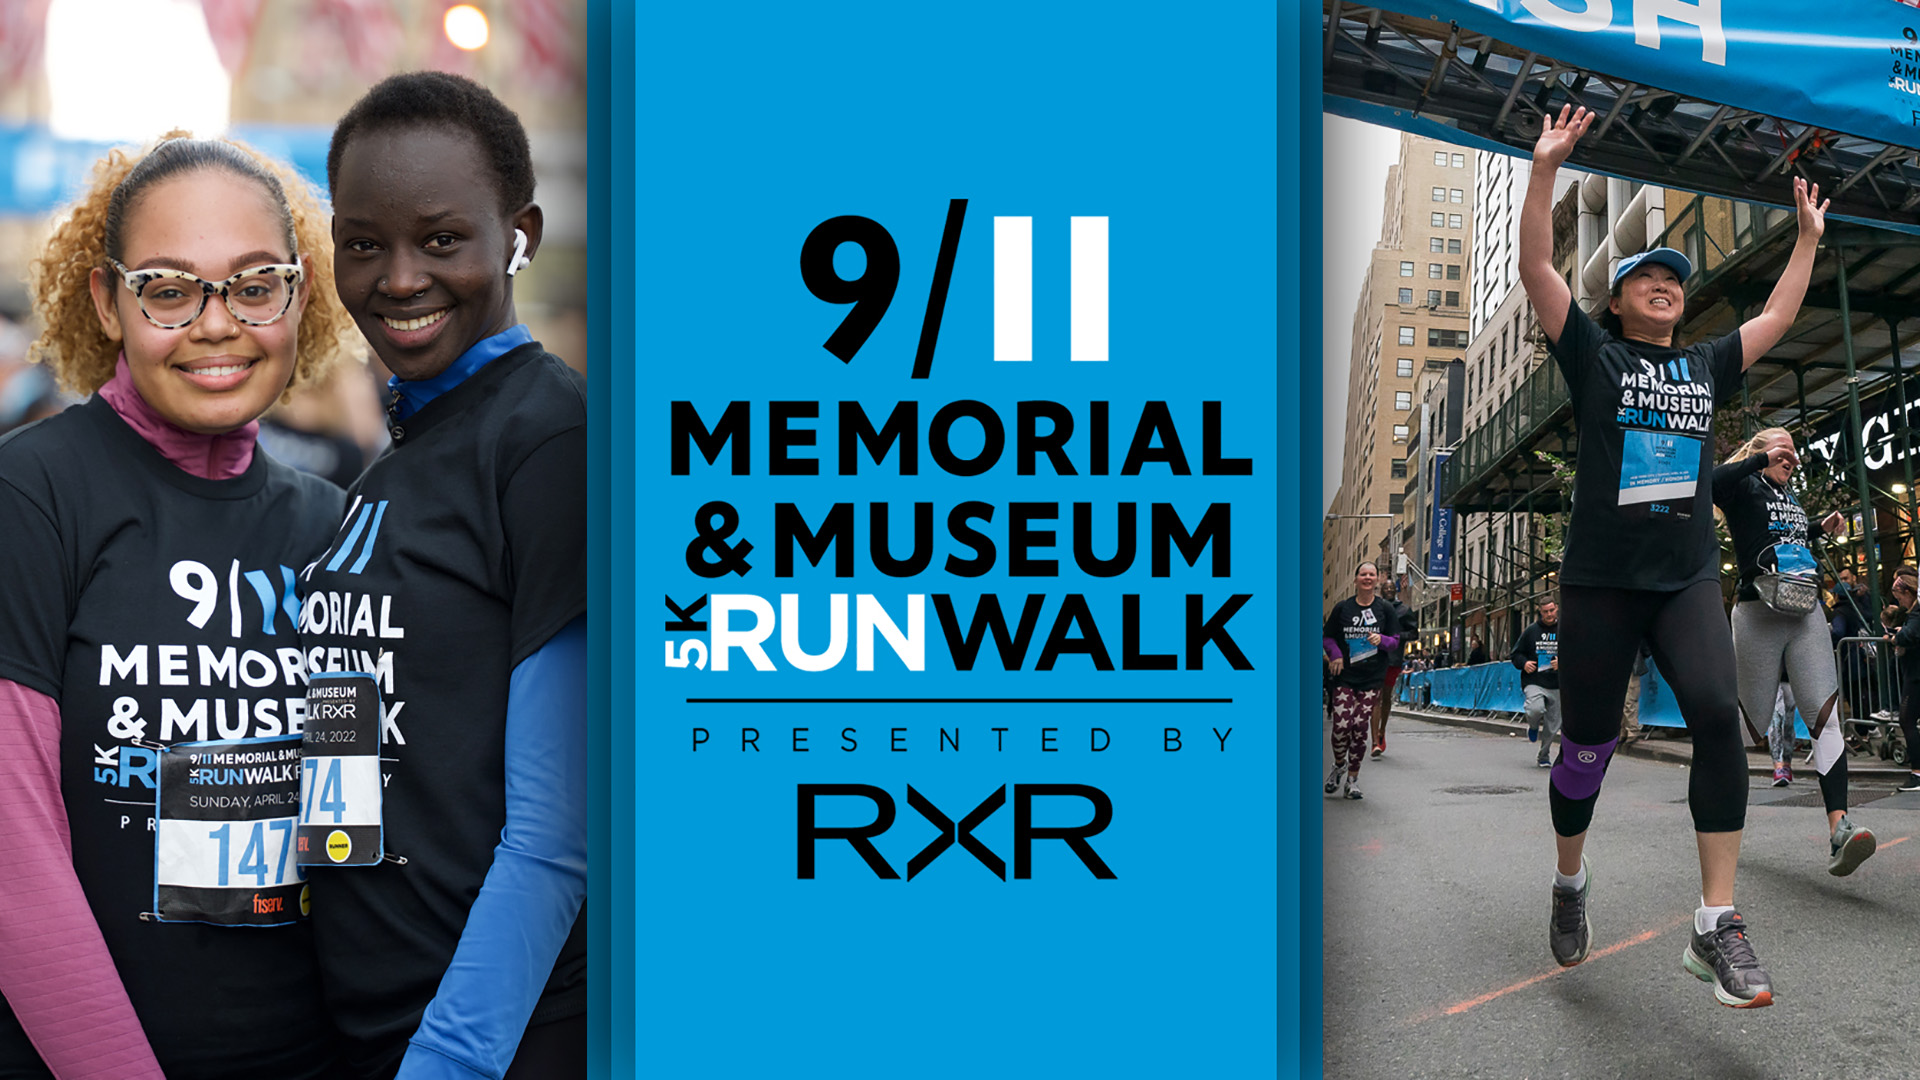 From left, two past participants standing and posing, one participant running with hands raised high in victory. Text between reads 9/11 Memorial & Museum 5K RunWalk Presented by RXR 